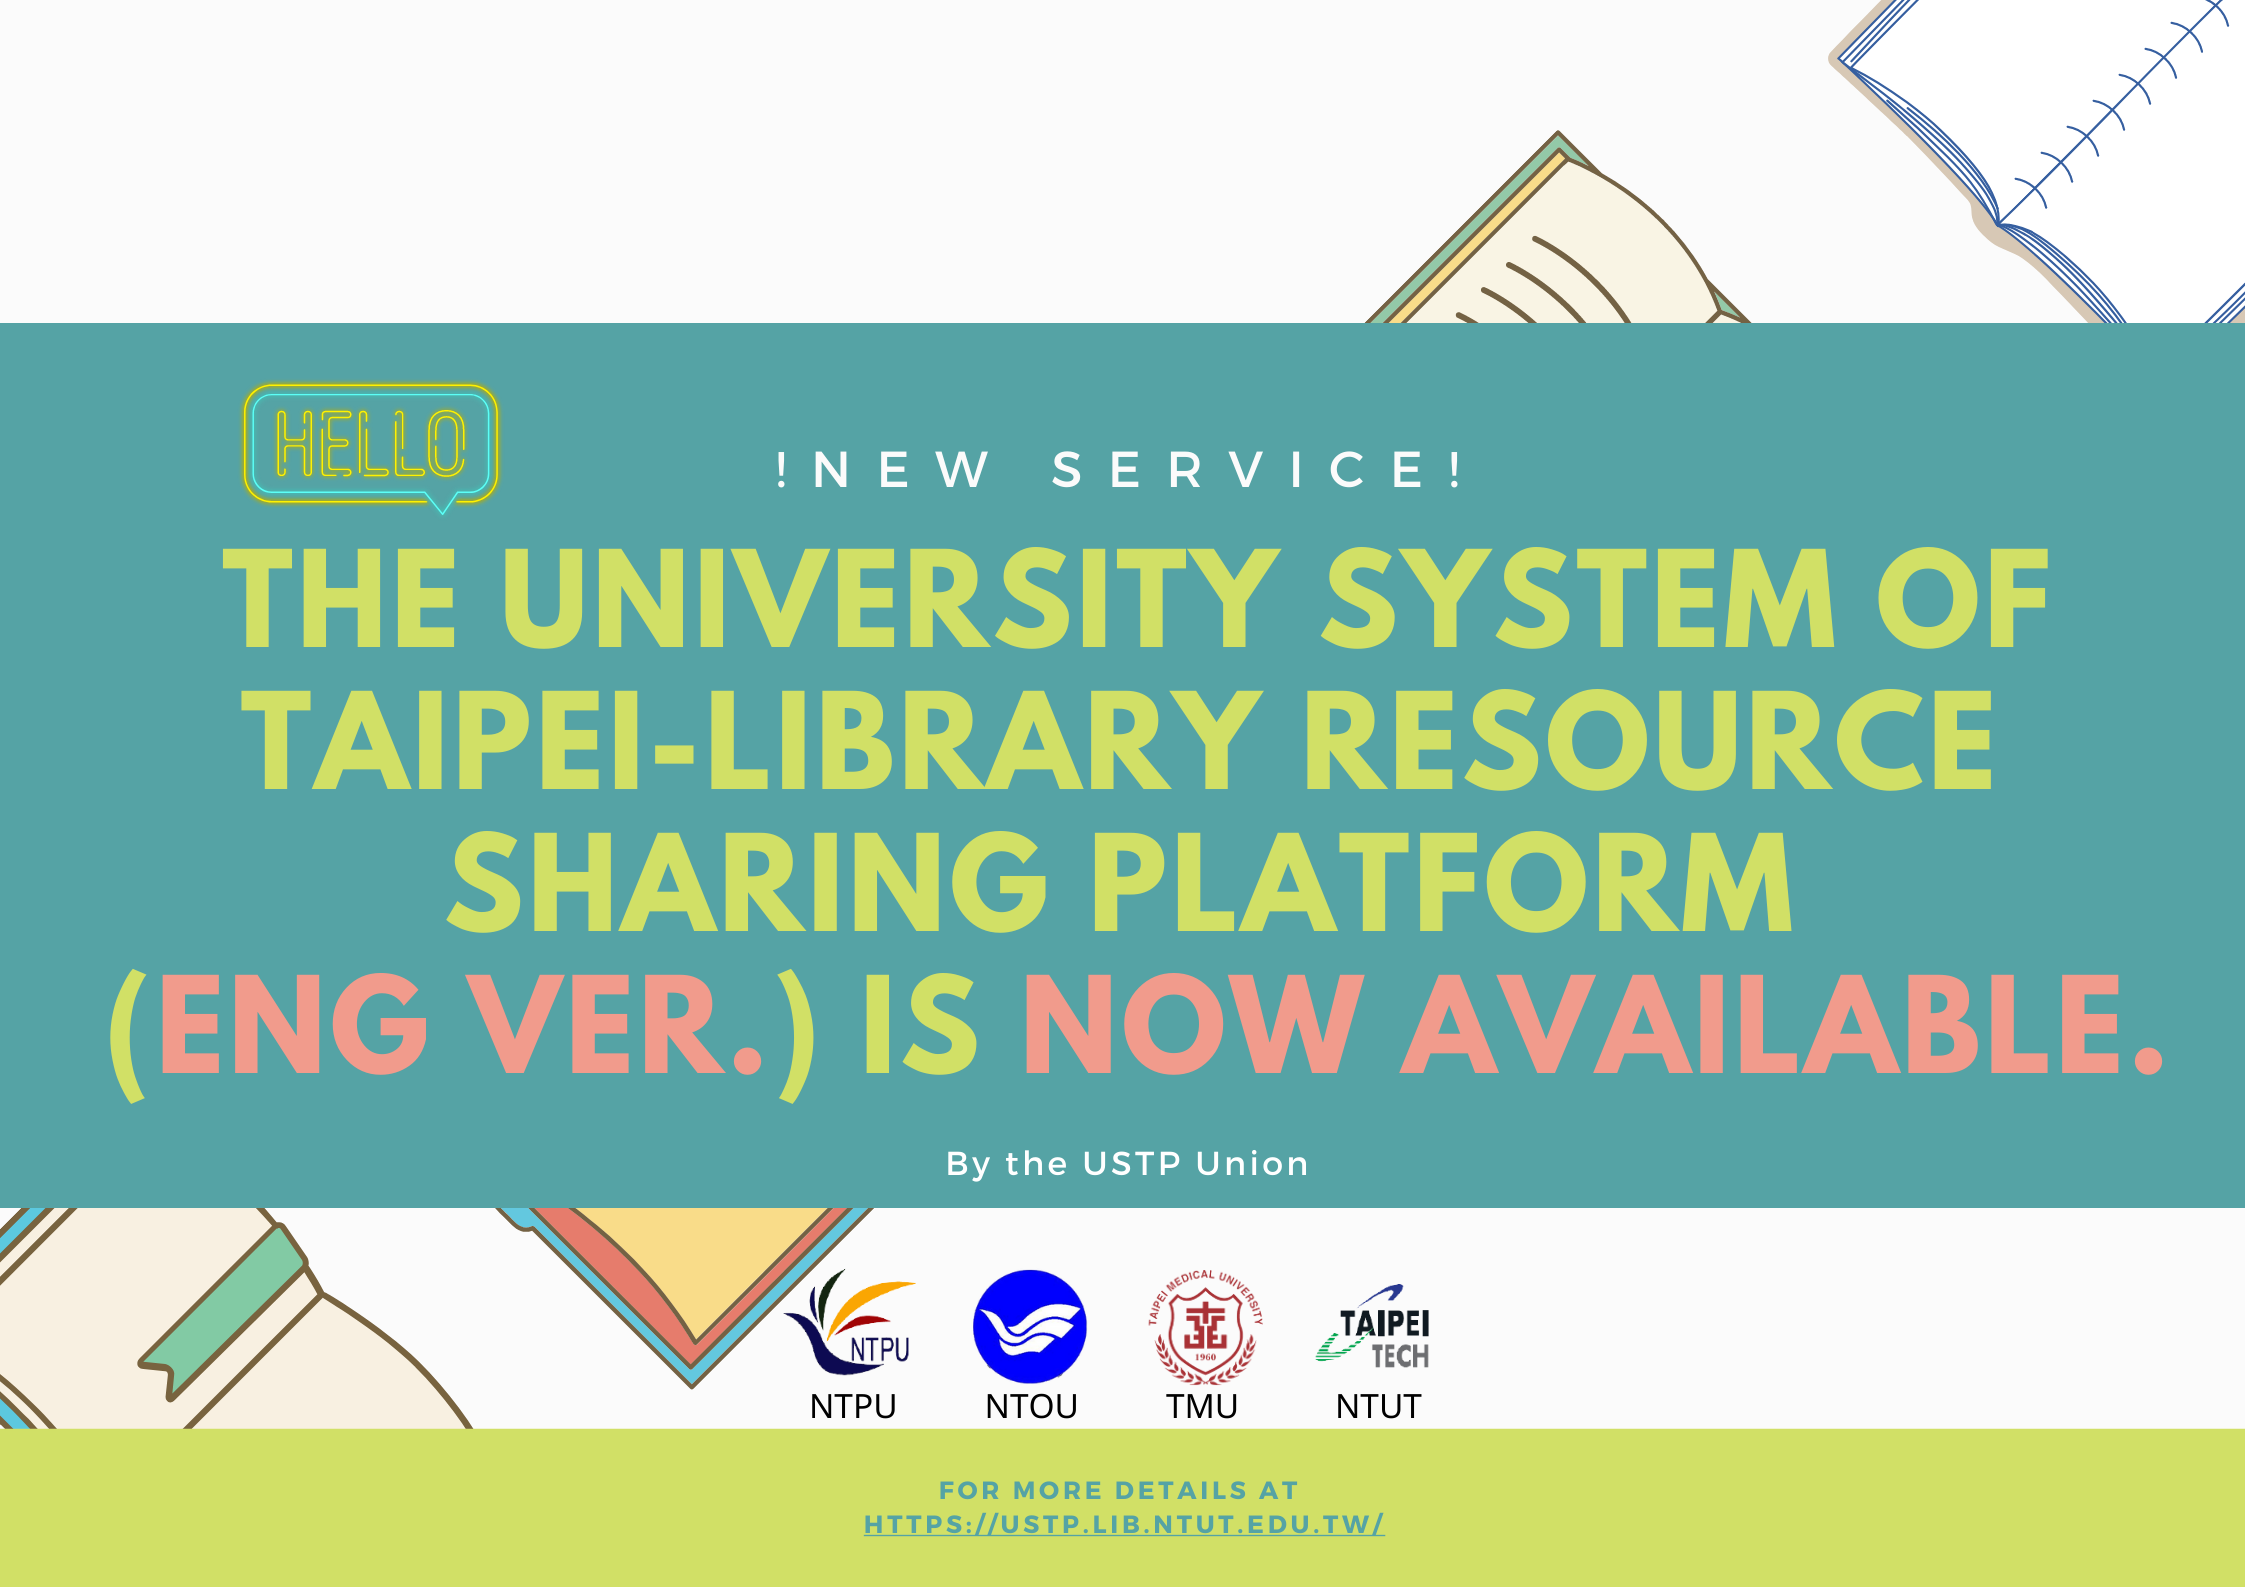 The English version of University System of Taipei-Library Resource Sharing Platform is available now!